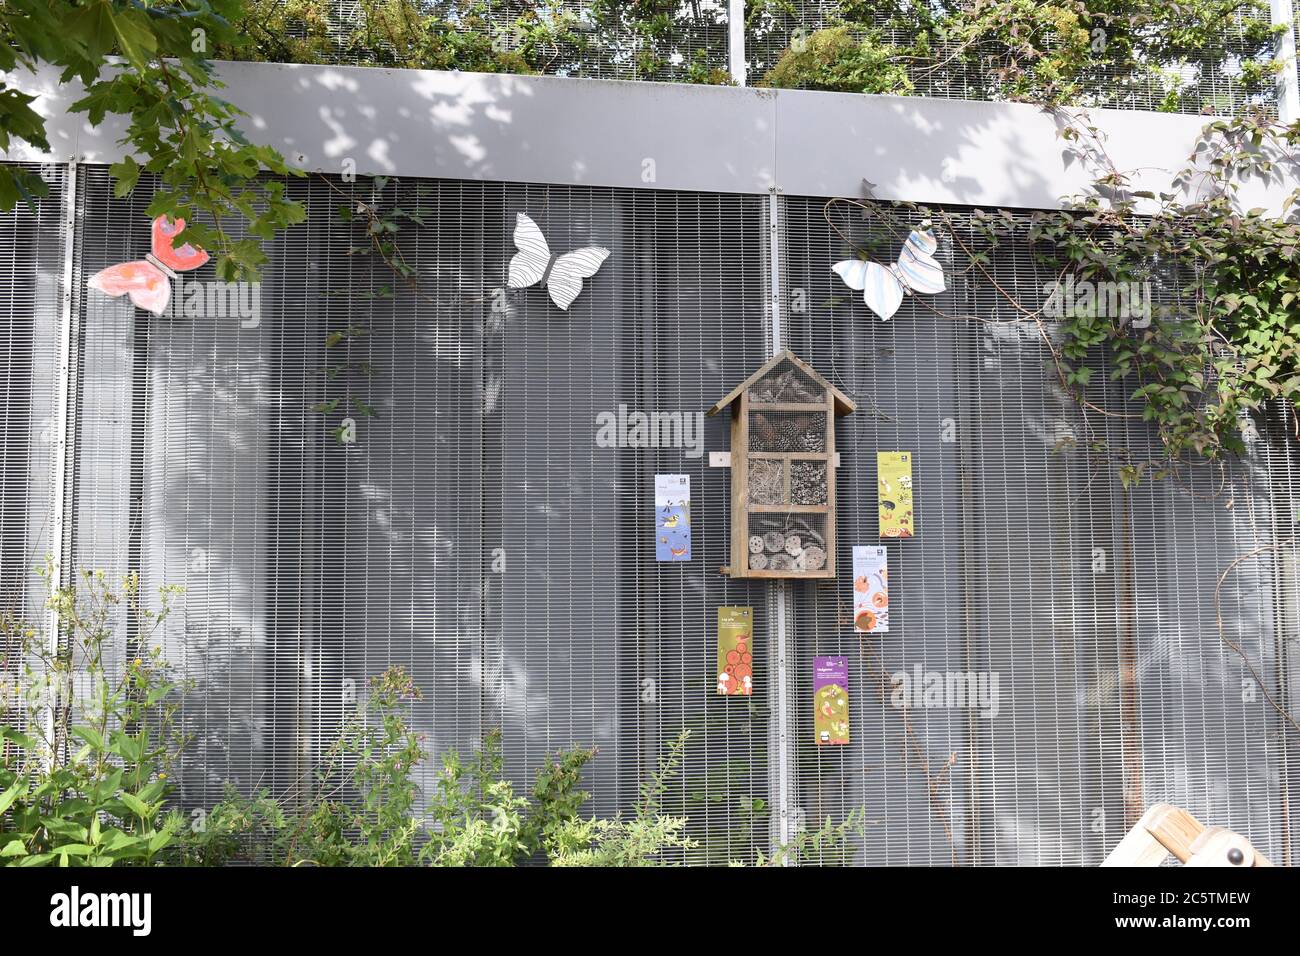 Cute insect hotel and wildlife area at MK1 Shopping Park, Milton Keynes. Stock Photo